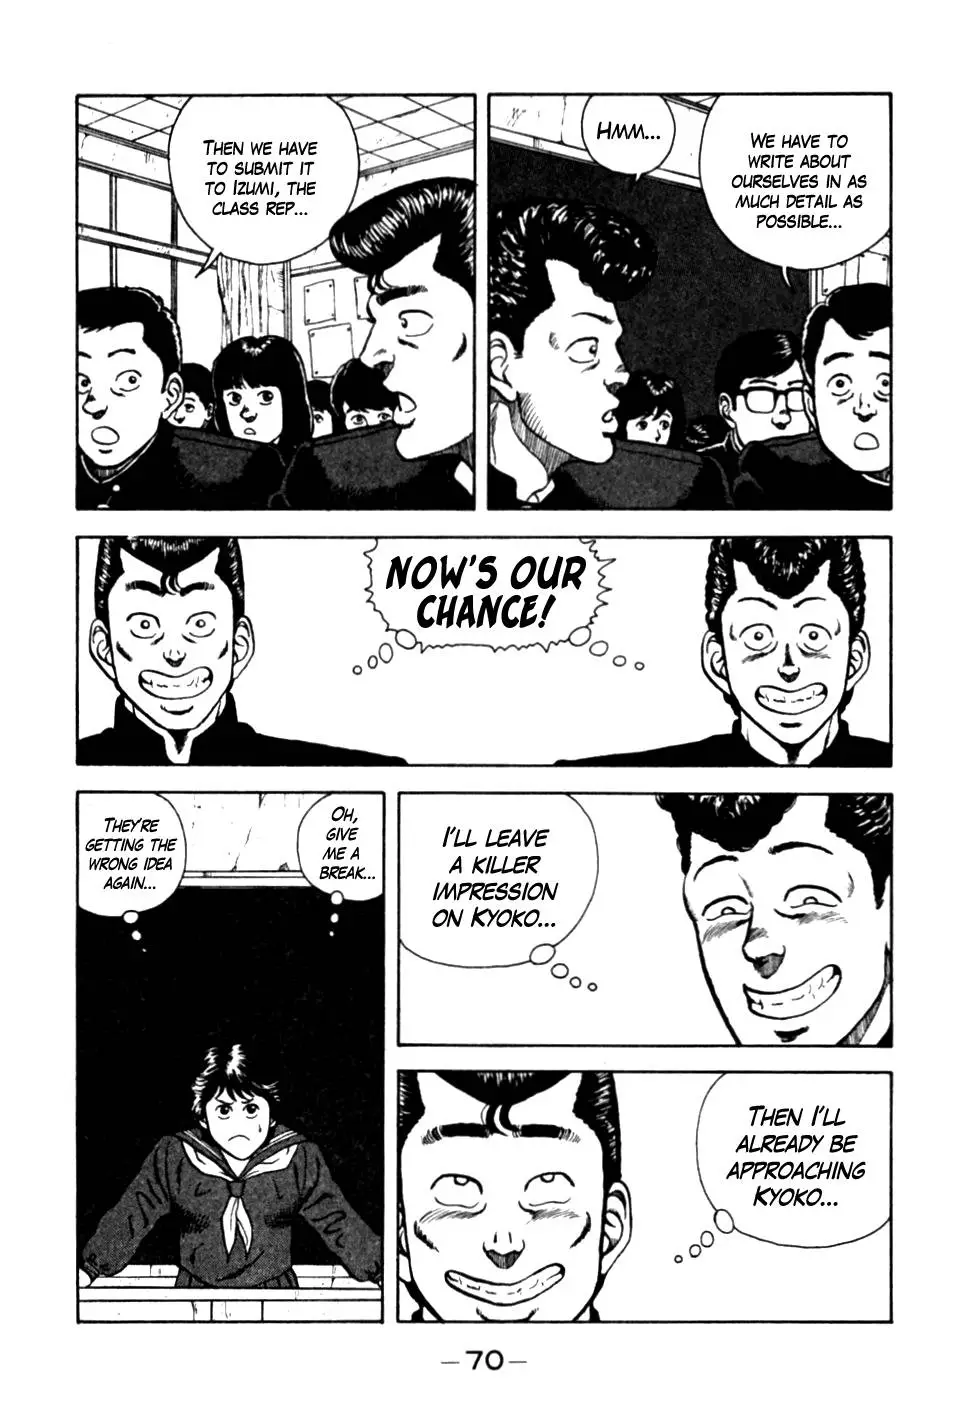 Be-Bop High School - 14 page p_00006